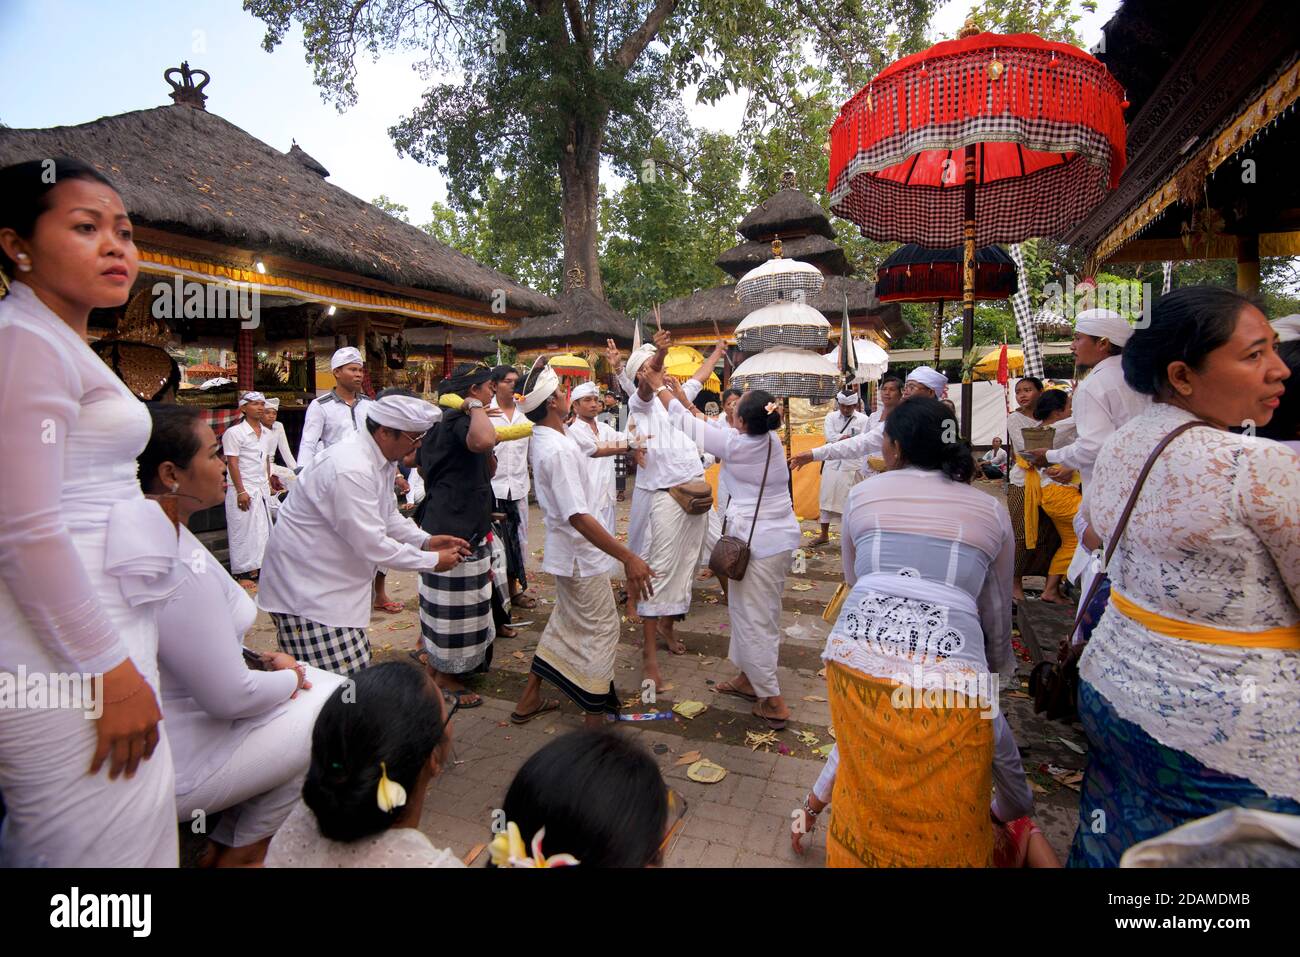 Balinese templegoers in festive attire at Sakenan temple, Bali, Indonesia. Some performers in the traditional dance events sucumb to a trance like state of possession after the dance performance and need exorcising. Stock Photo